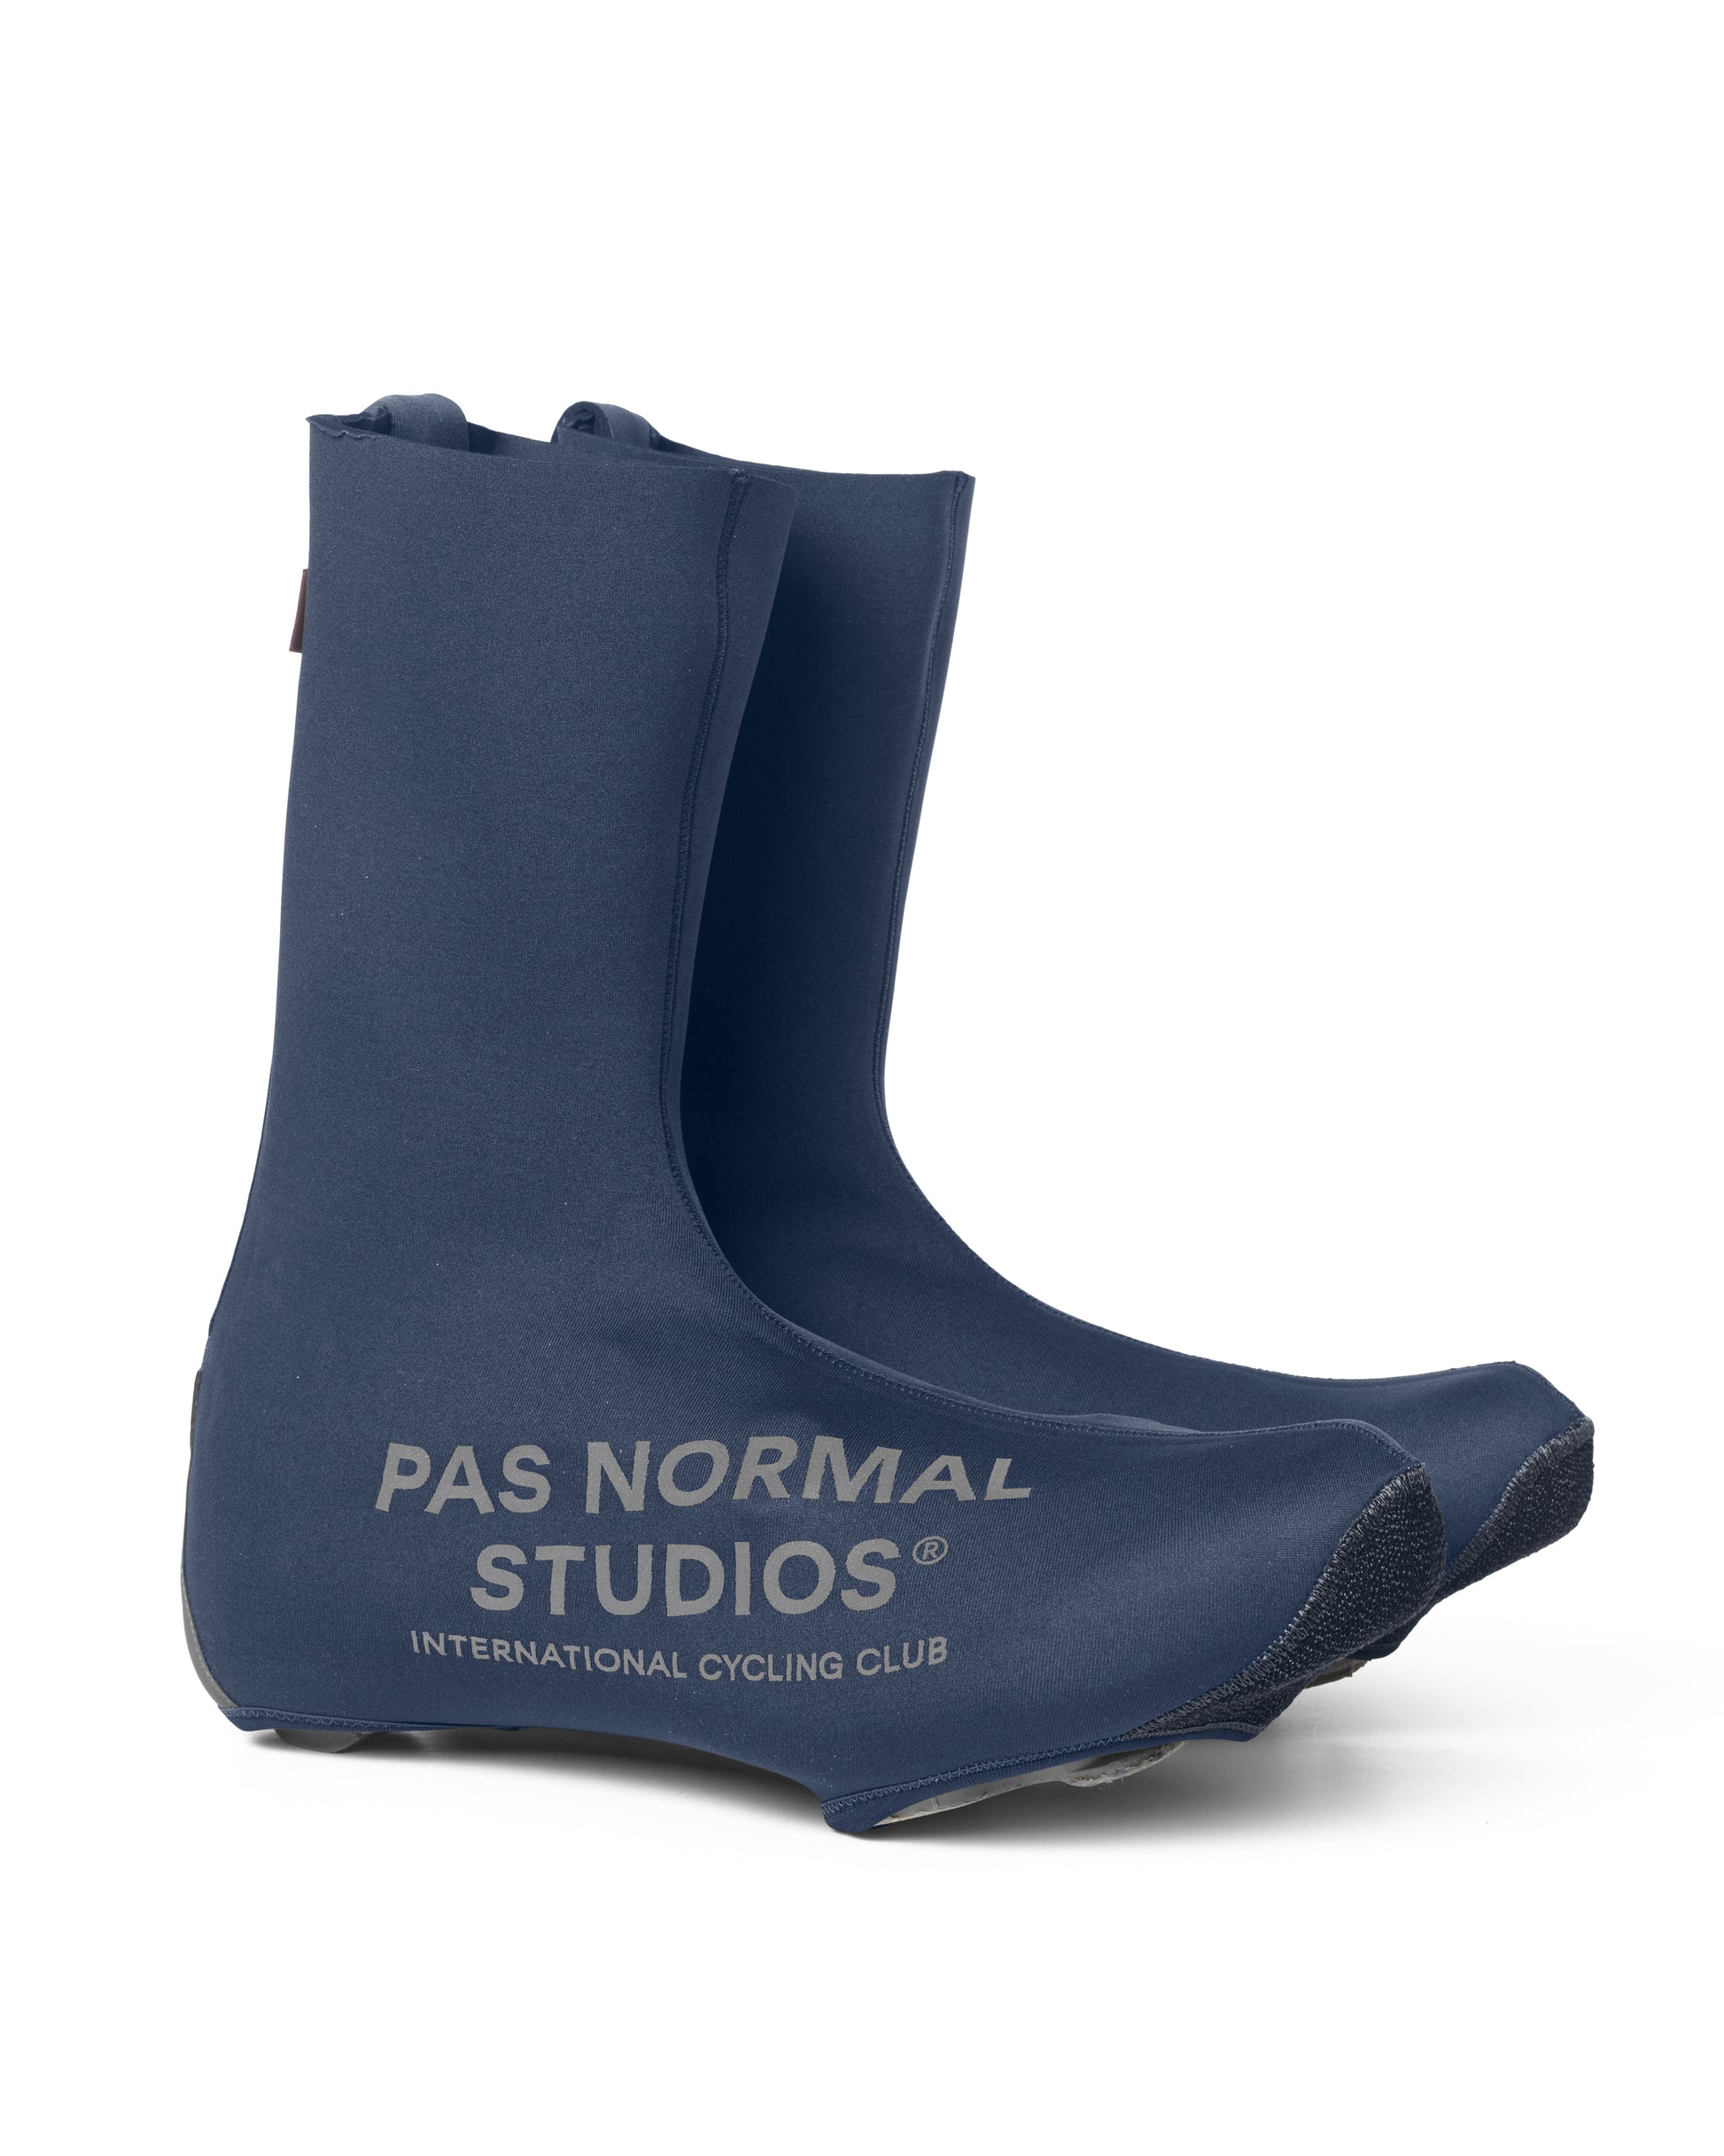 Stories / How do you put on an overshoe?